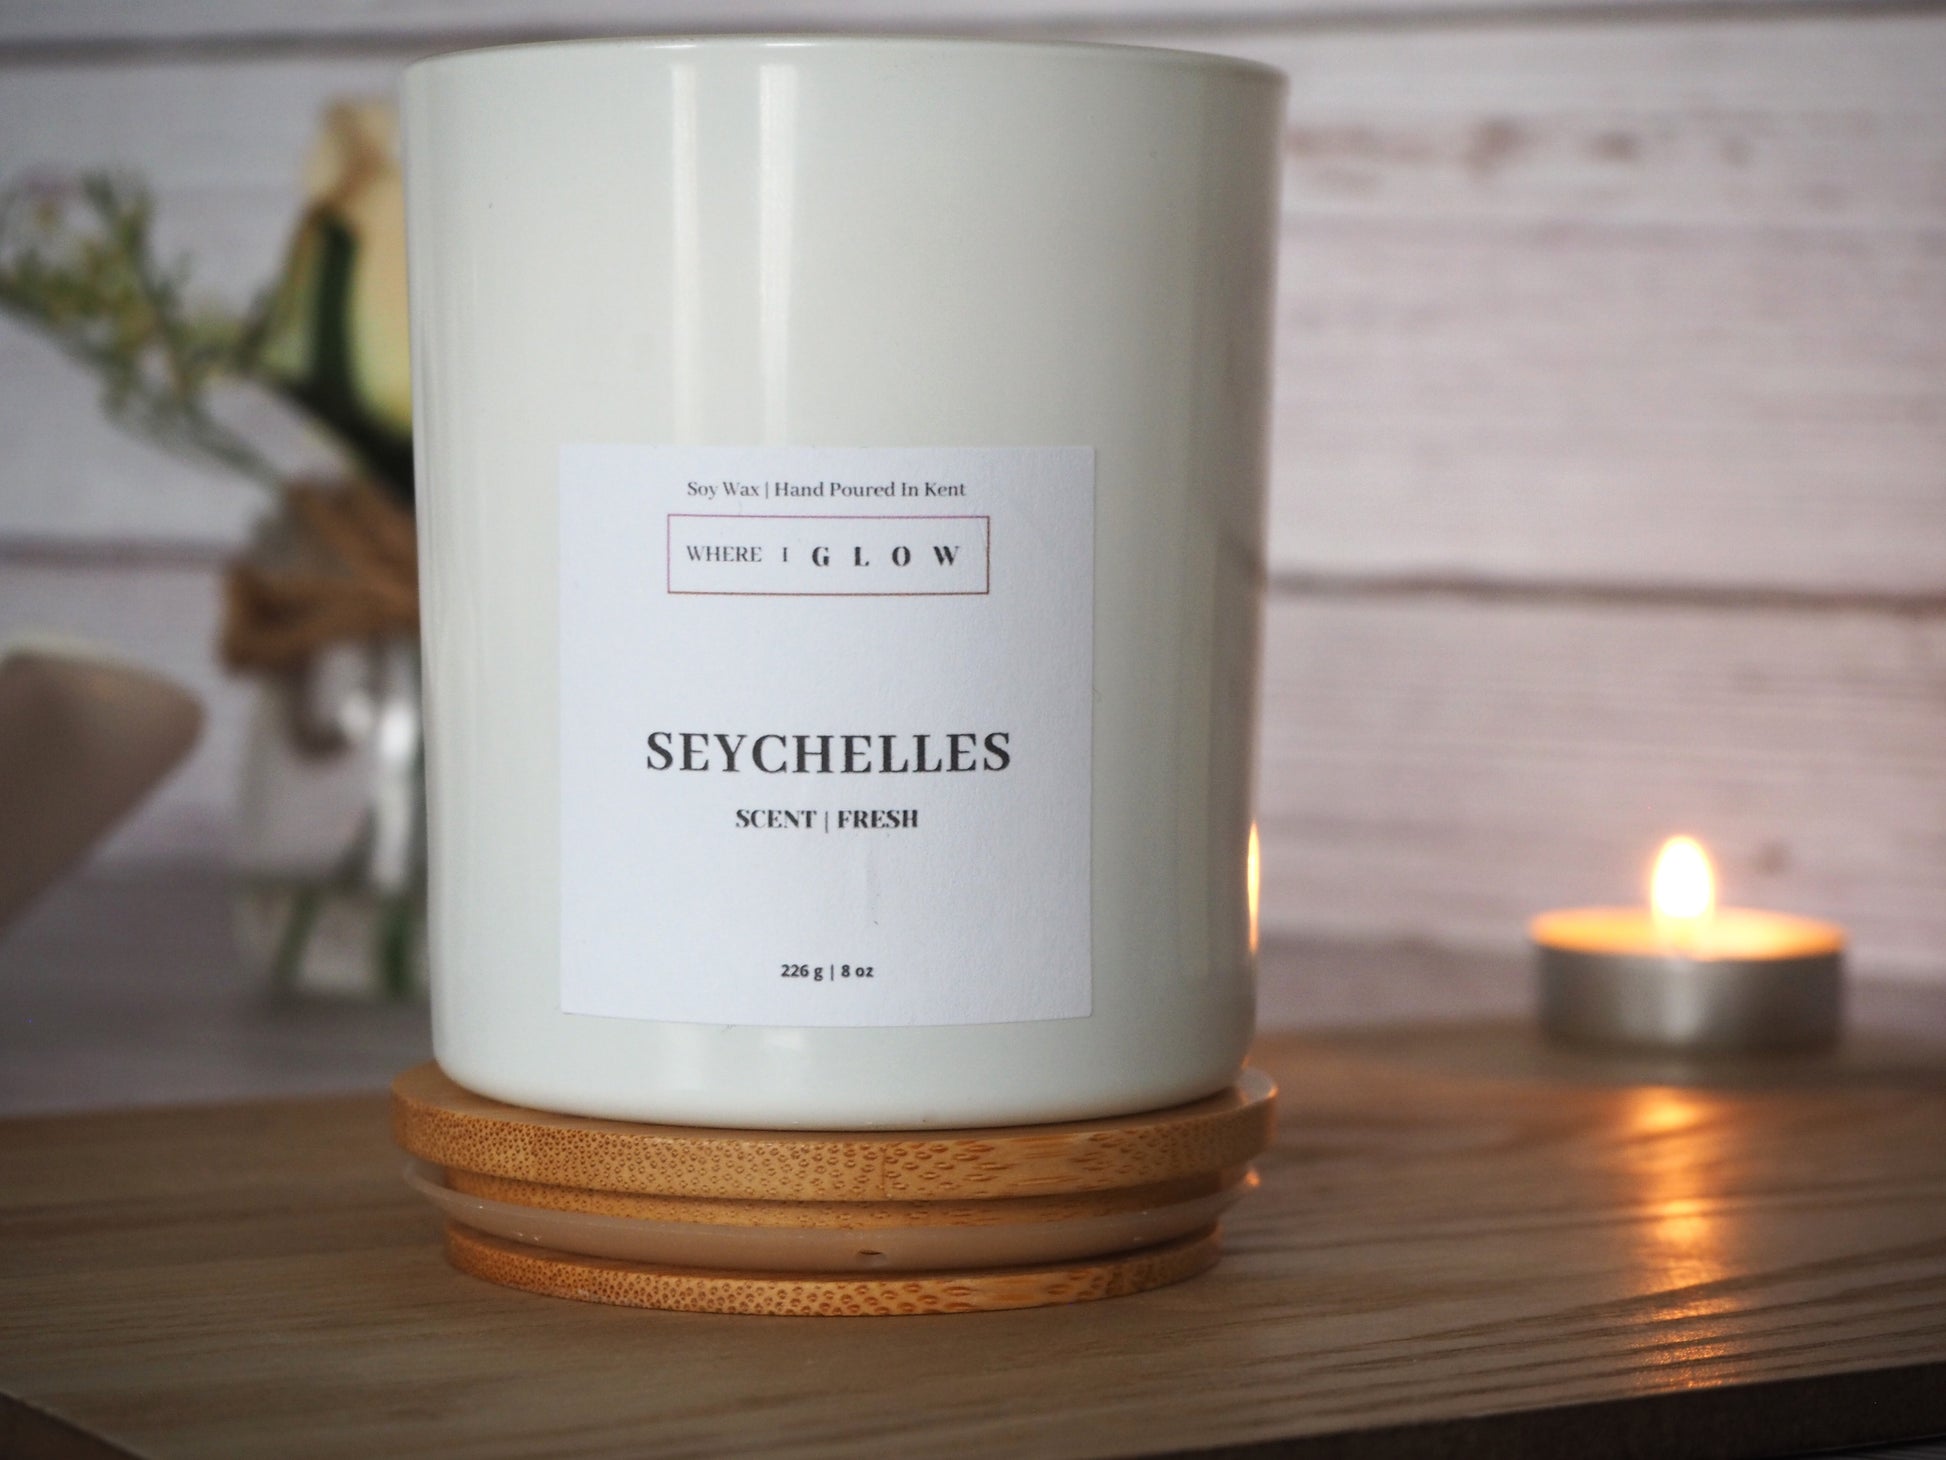 Seychelles Soy Candle 8 oz by Where I Glow